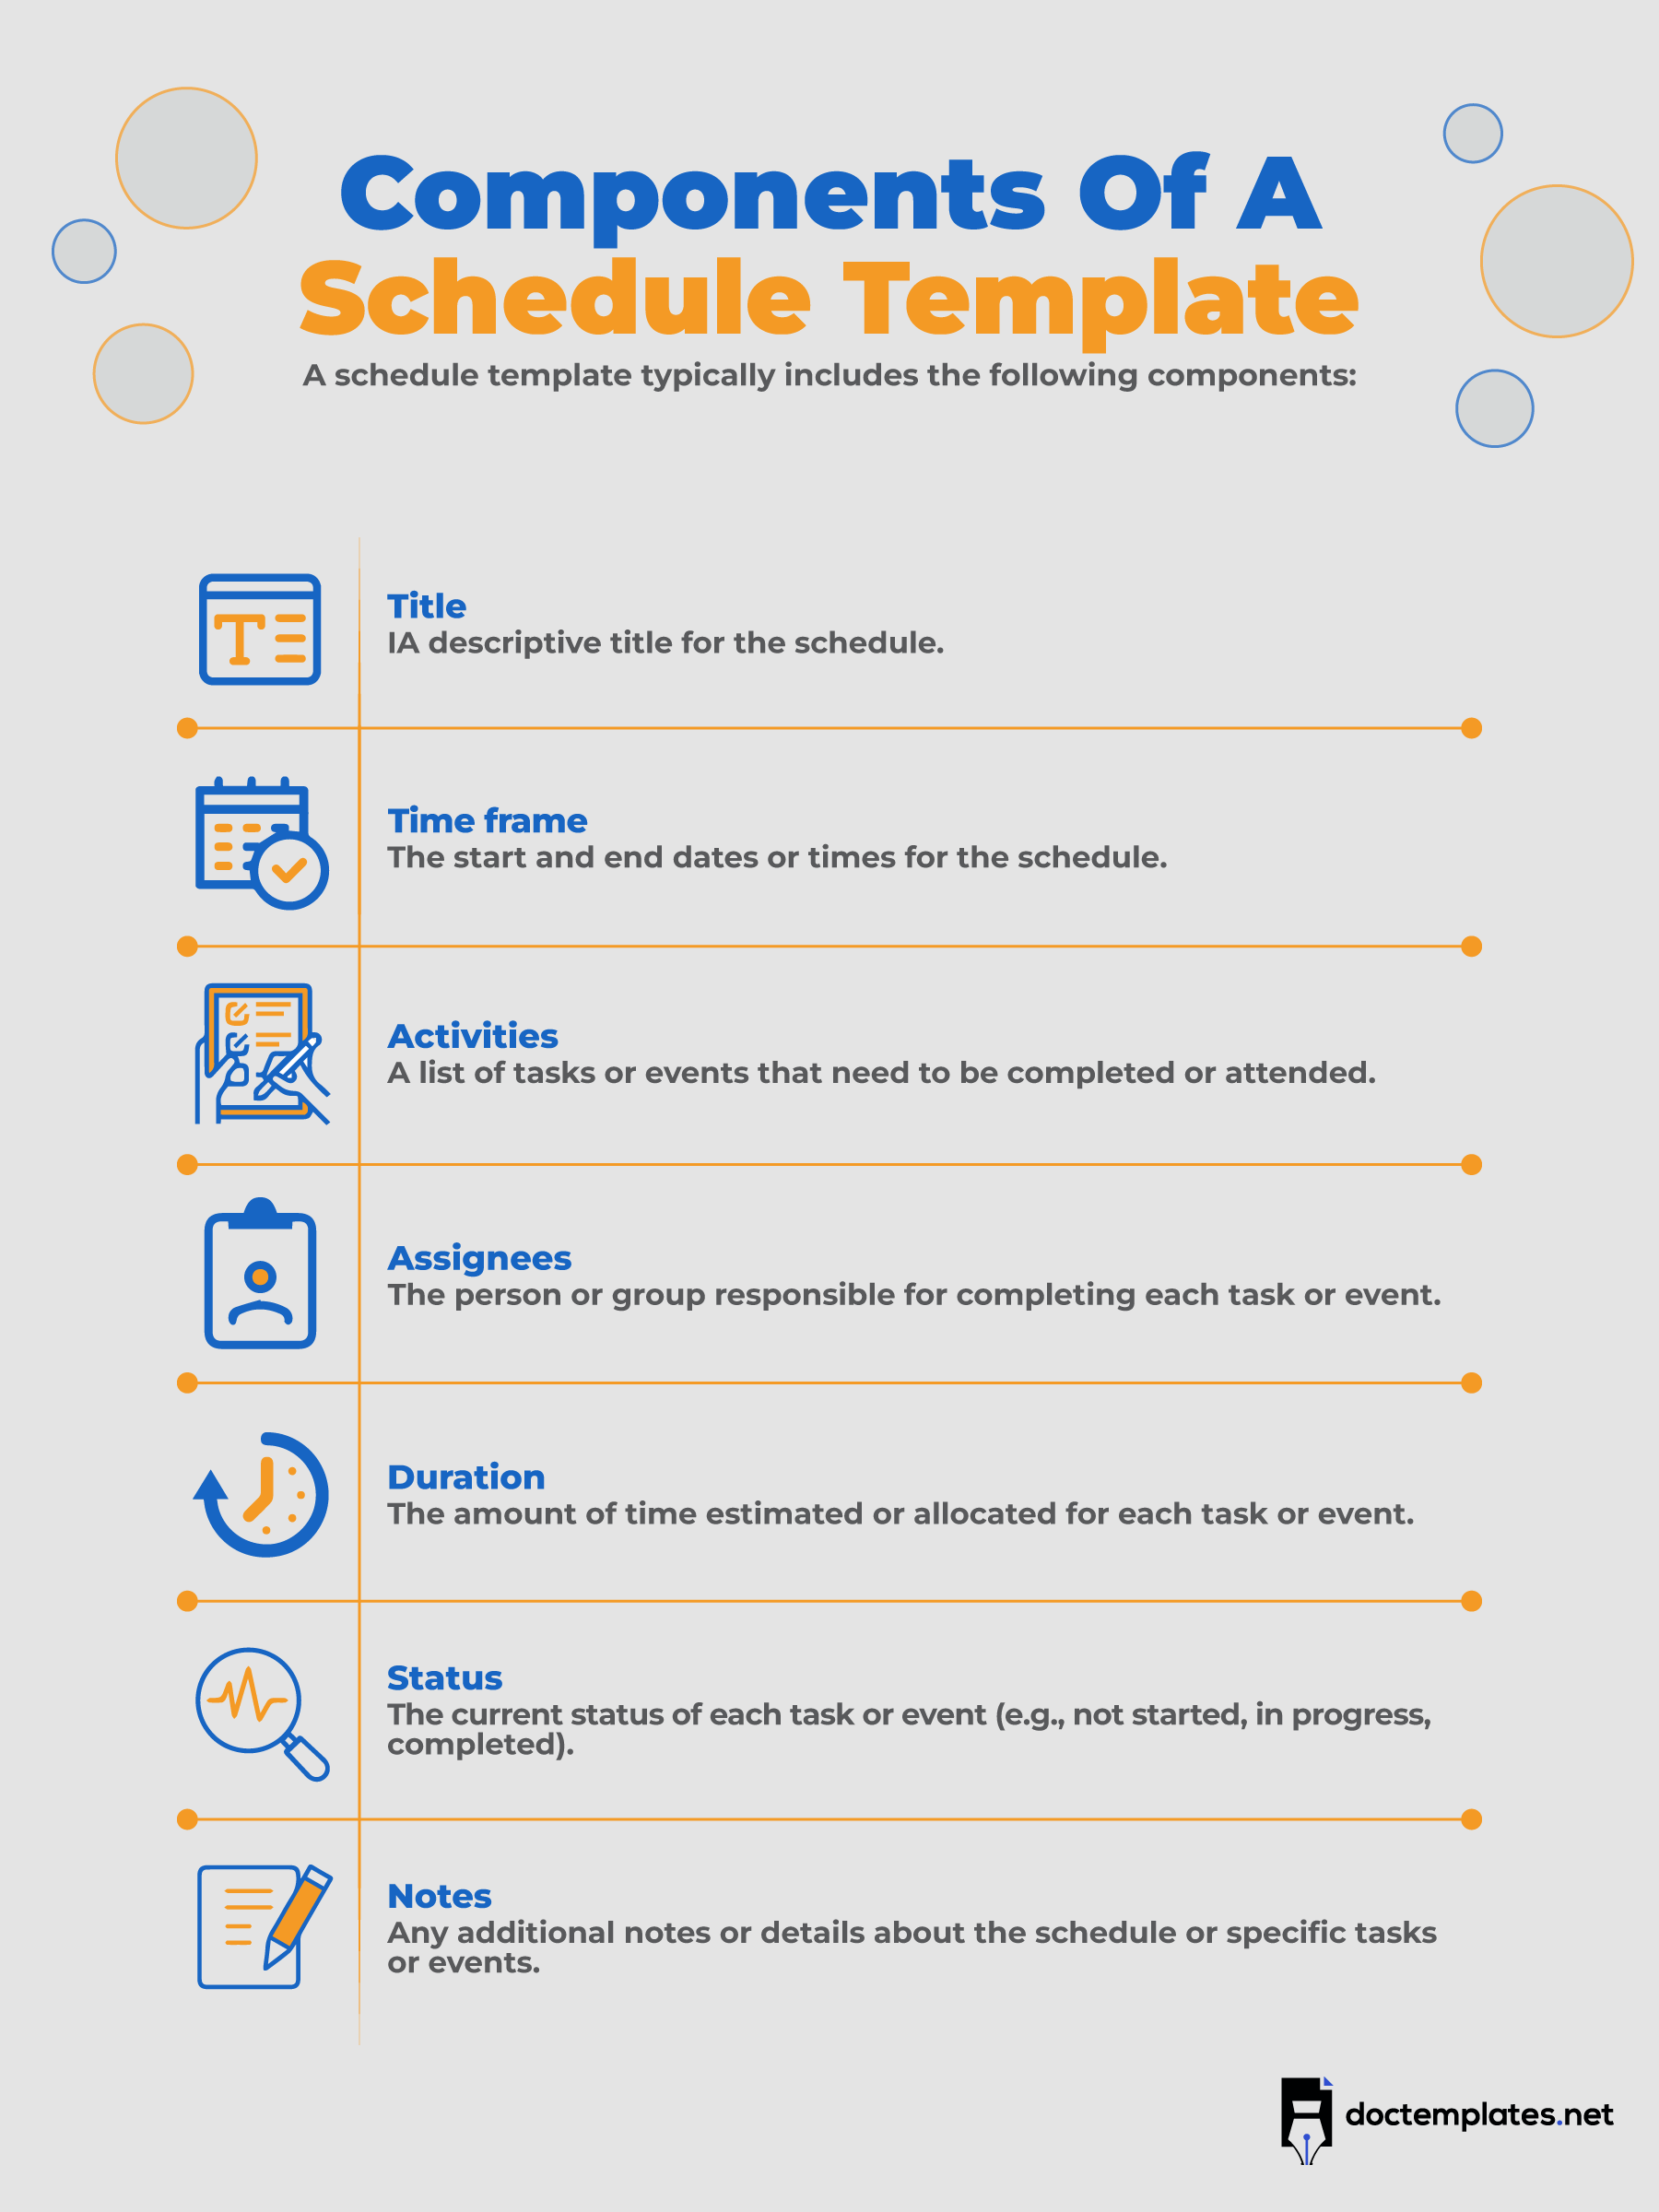 This infographic is about schedule template components. 